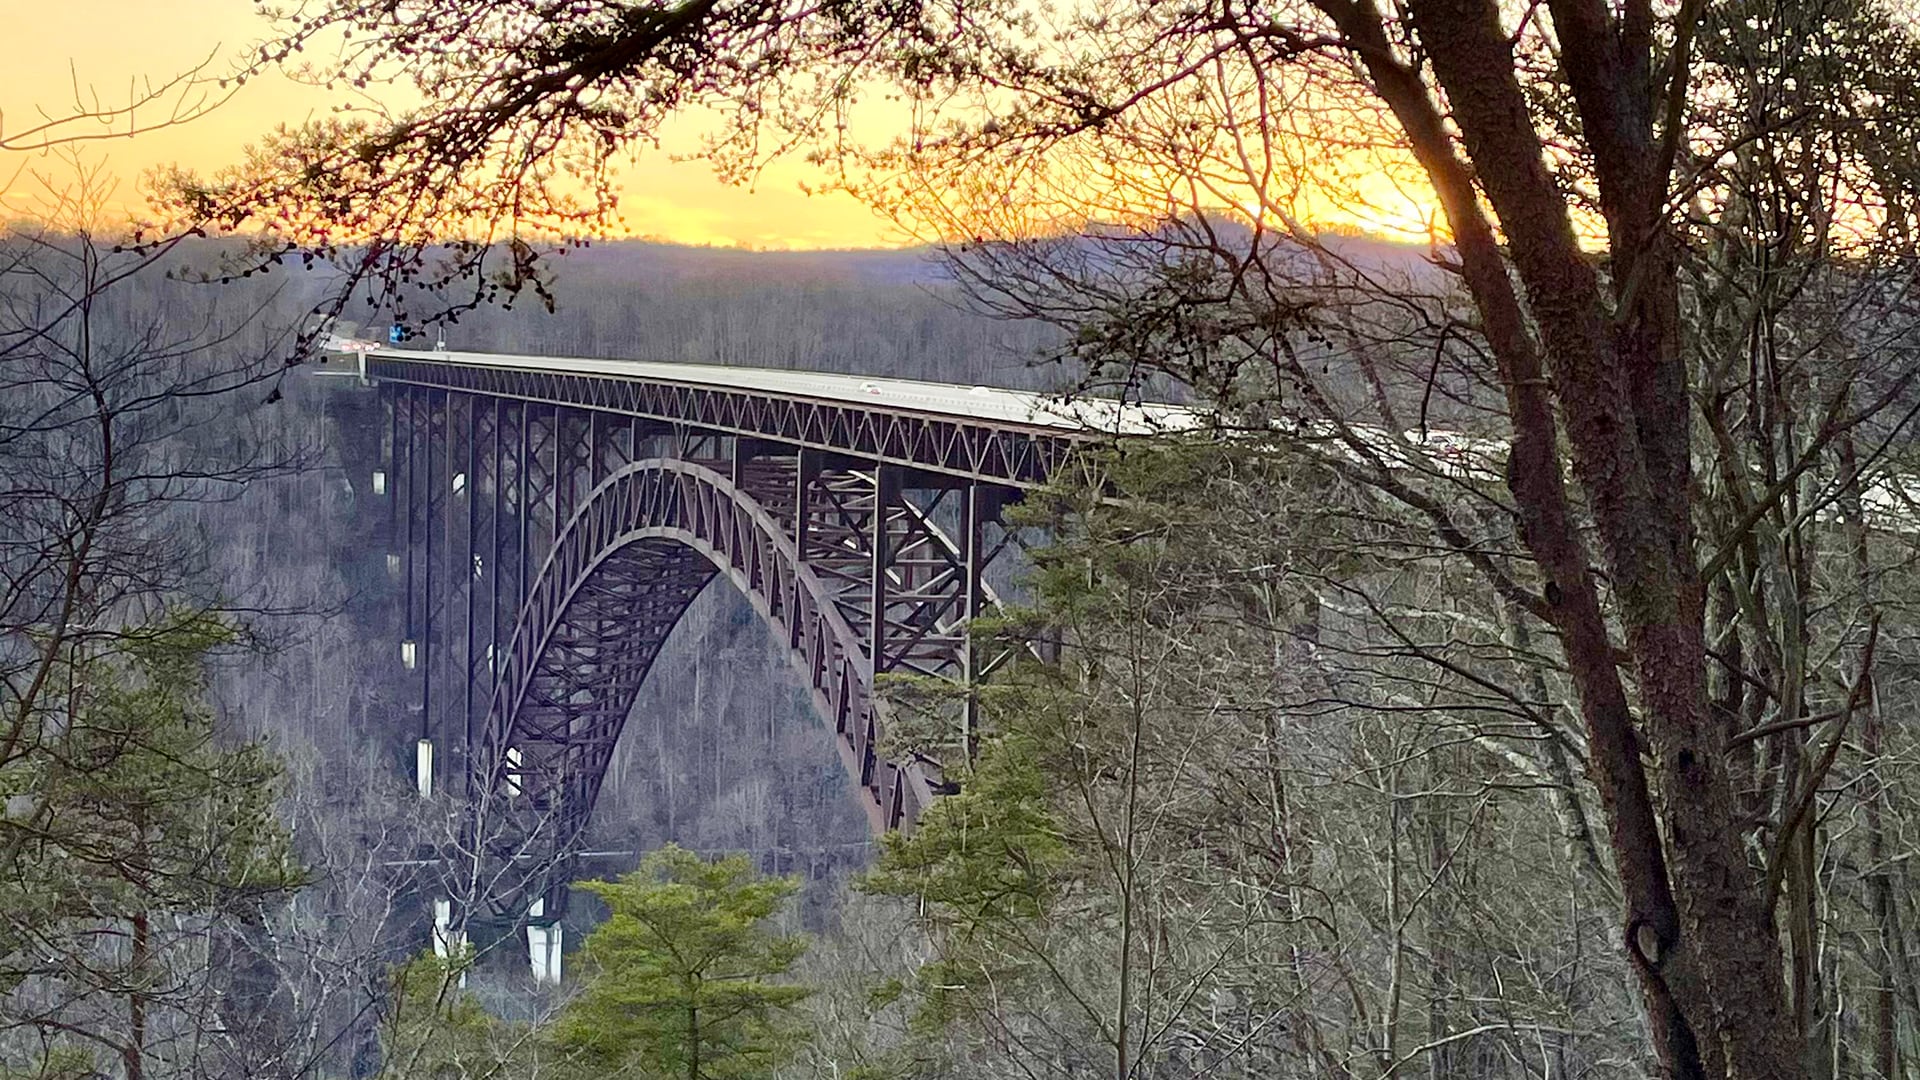 The New River Gorge Bridge as seen from the Canyon Rim Visitor Center